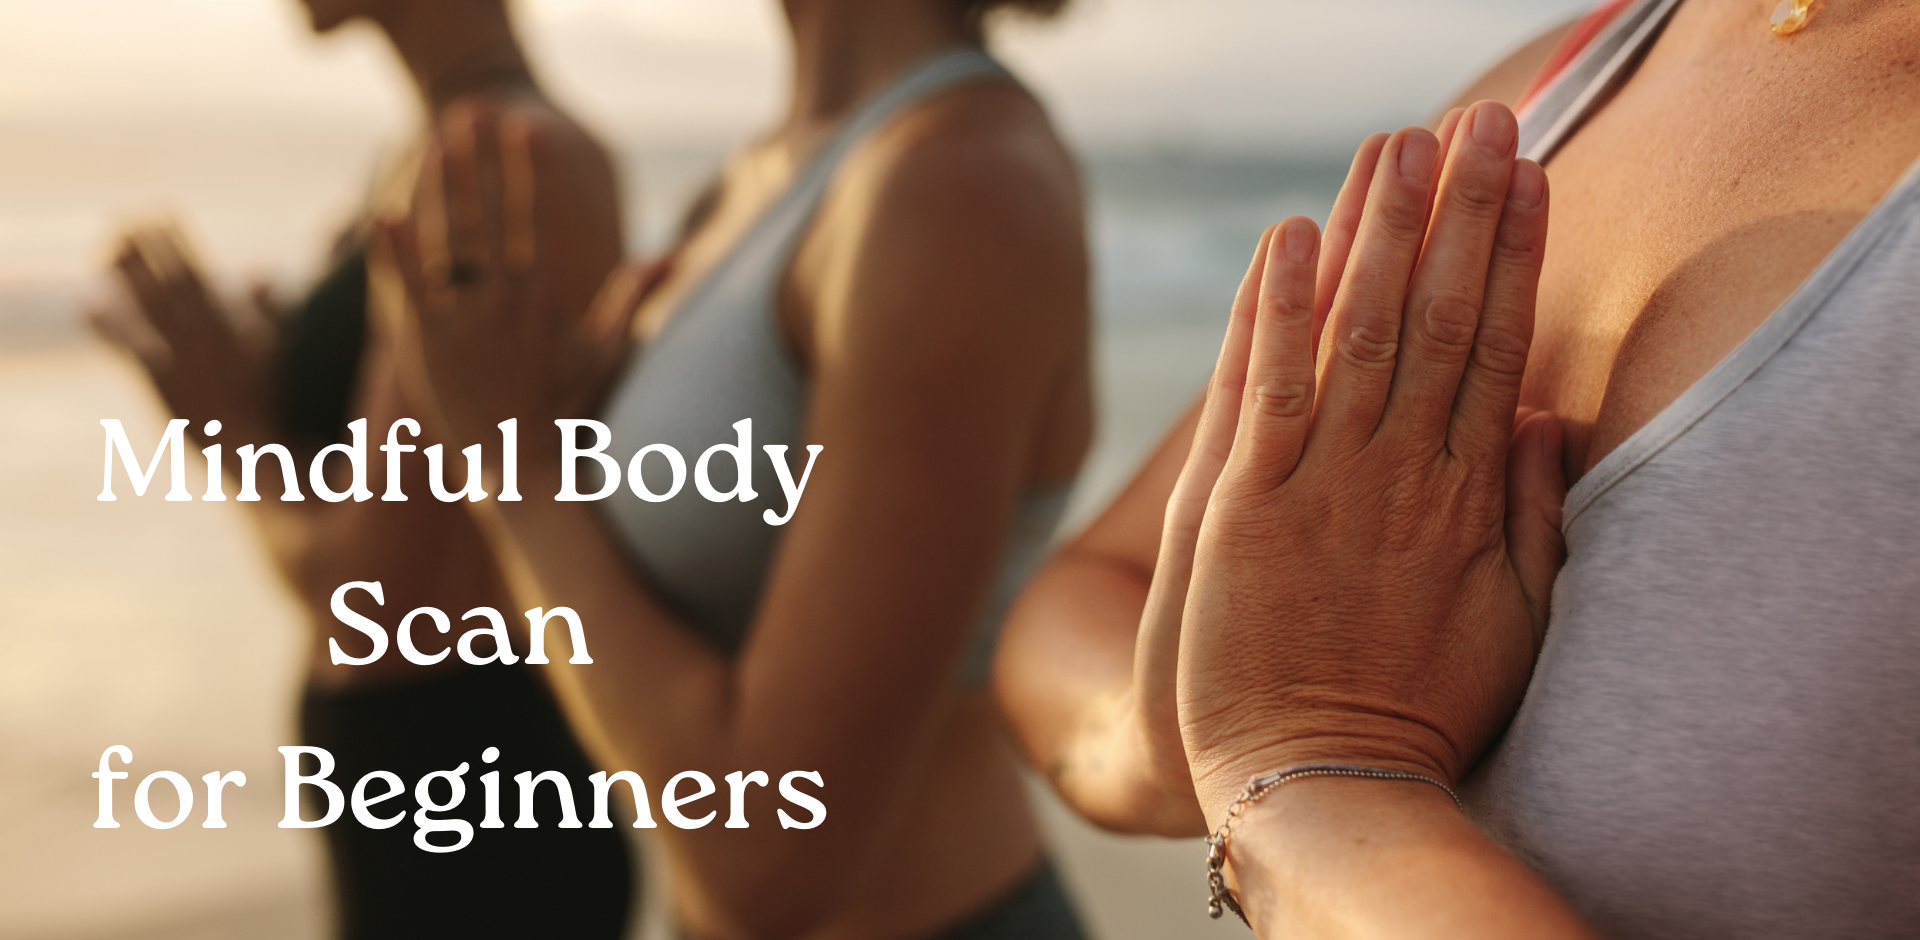 Mindful Body Scan for Beginners